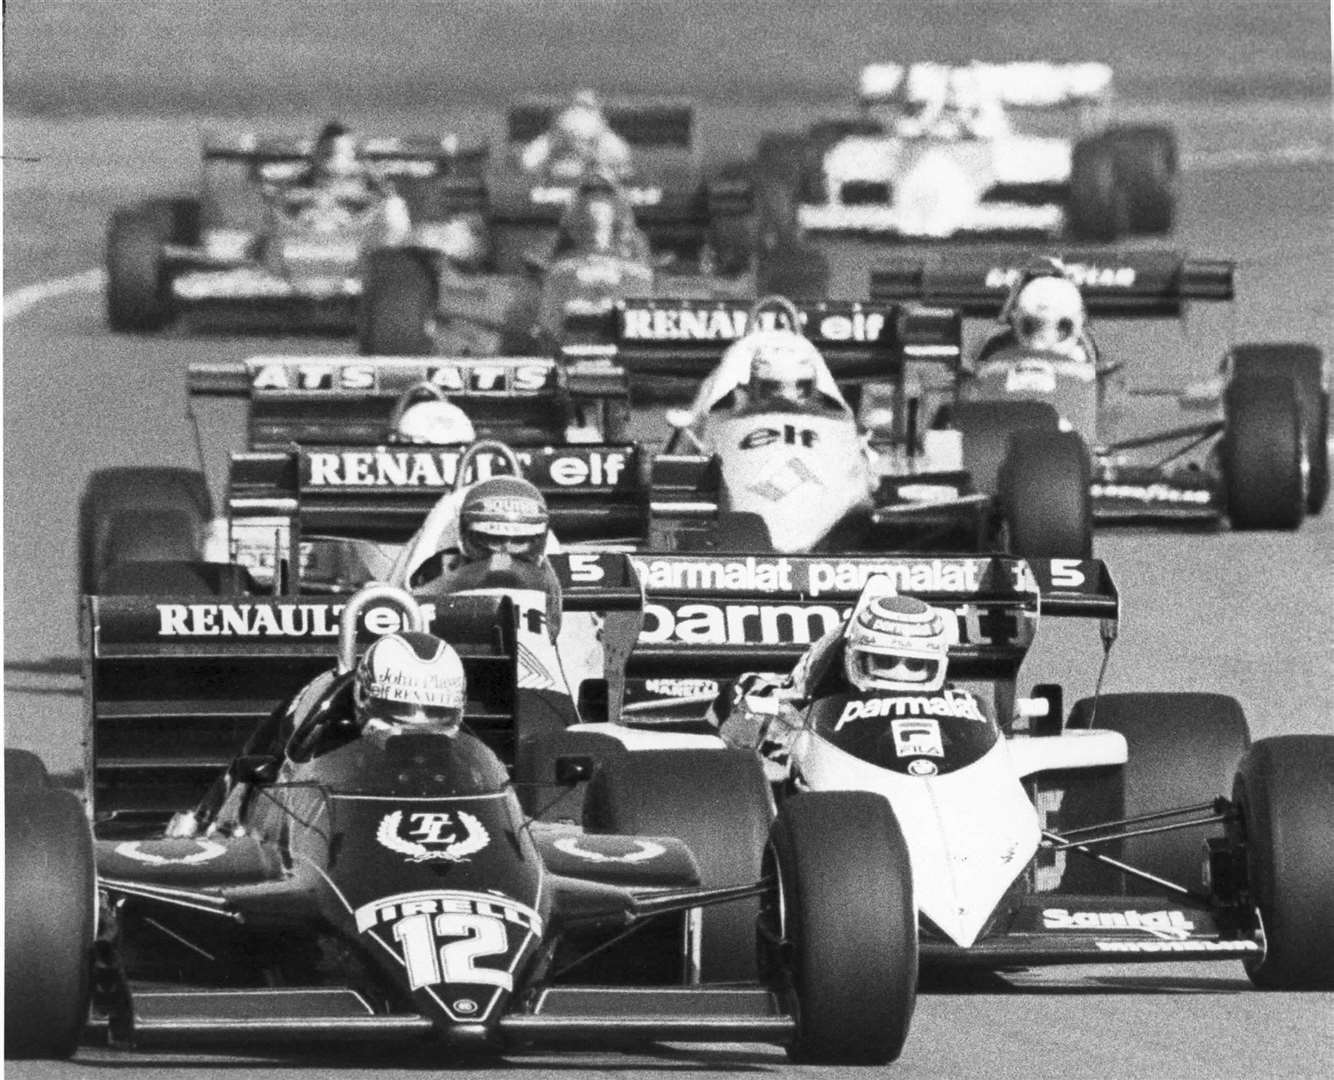 Britain's Nigel Mansell leads Nelson Piquet at the start of the Grand Prix of Europe at Brands Hatch in 1983 - a race quickly added to the schedule after a planned race in the US fell through